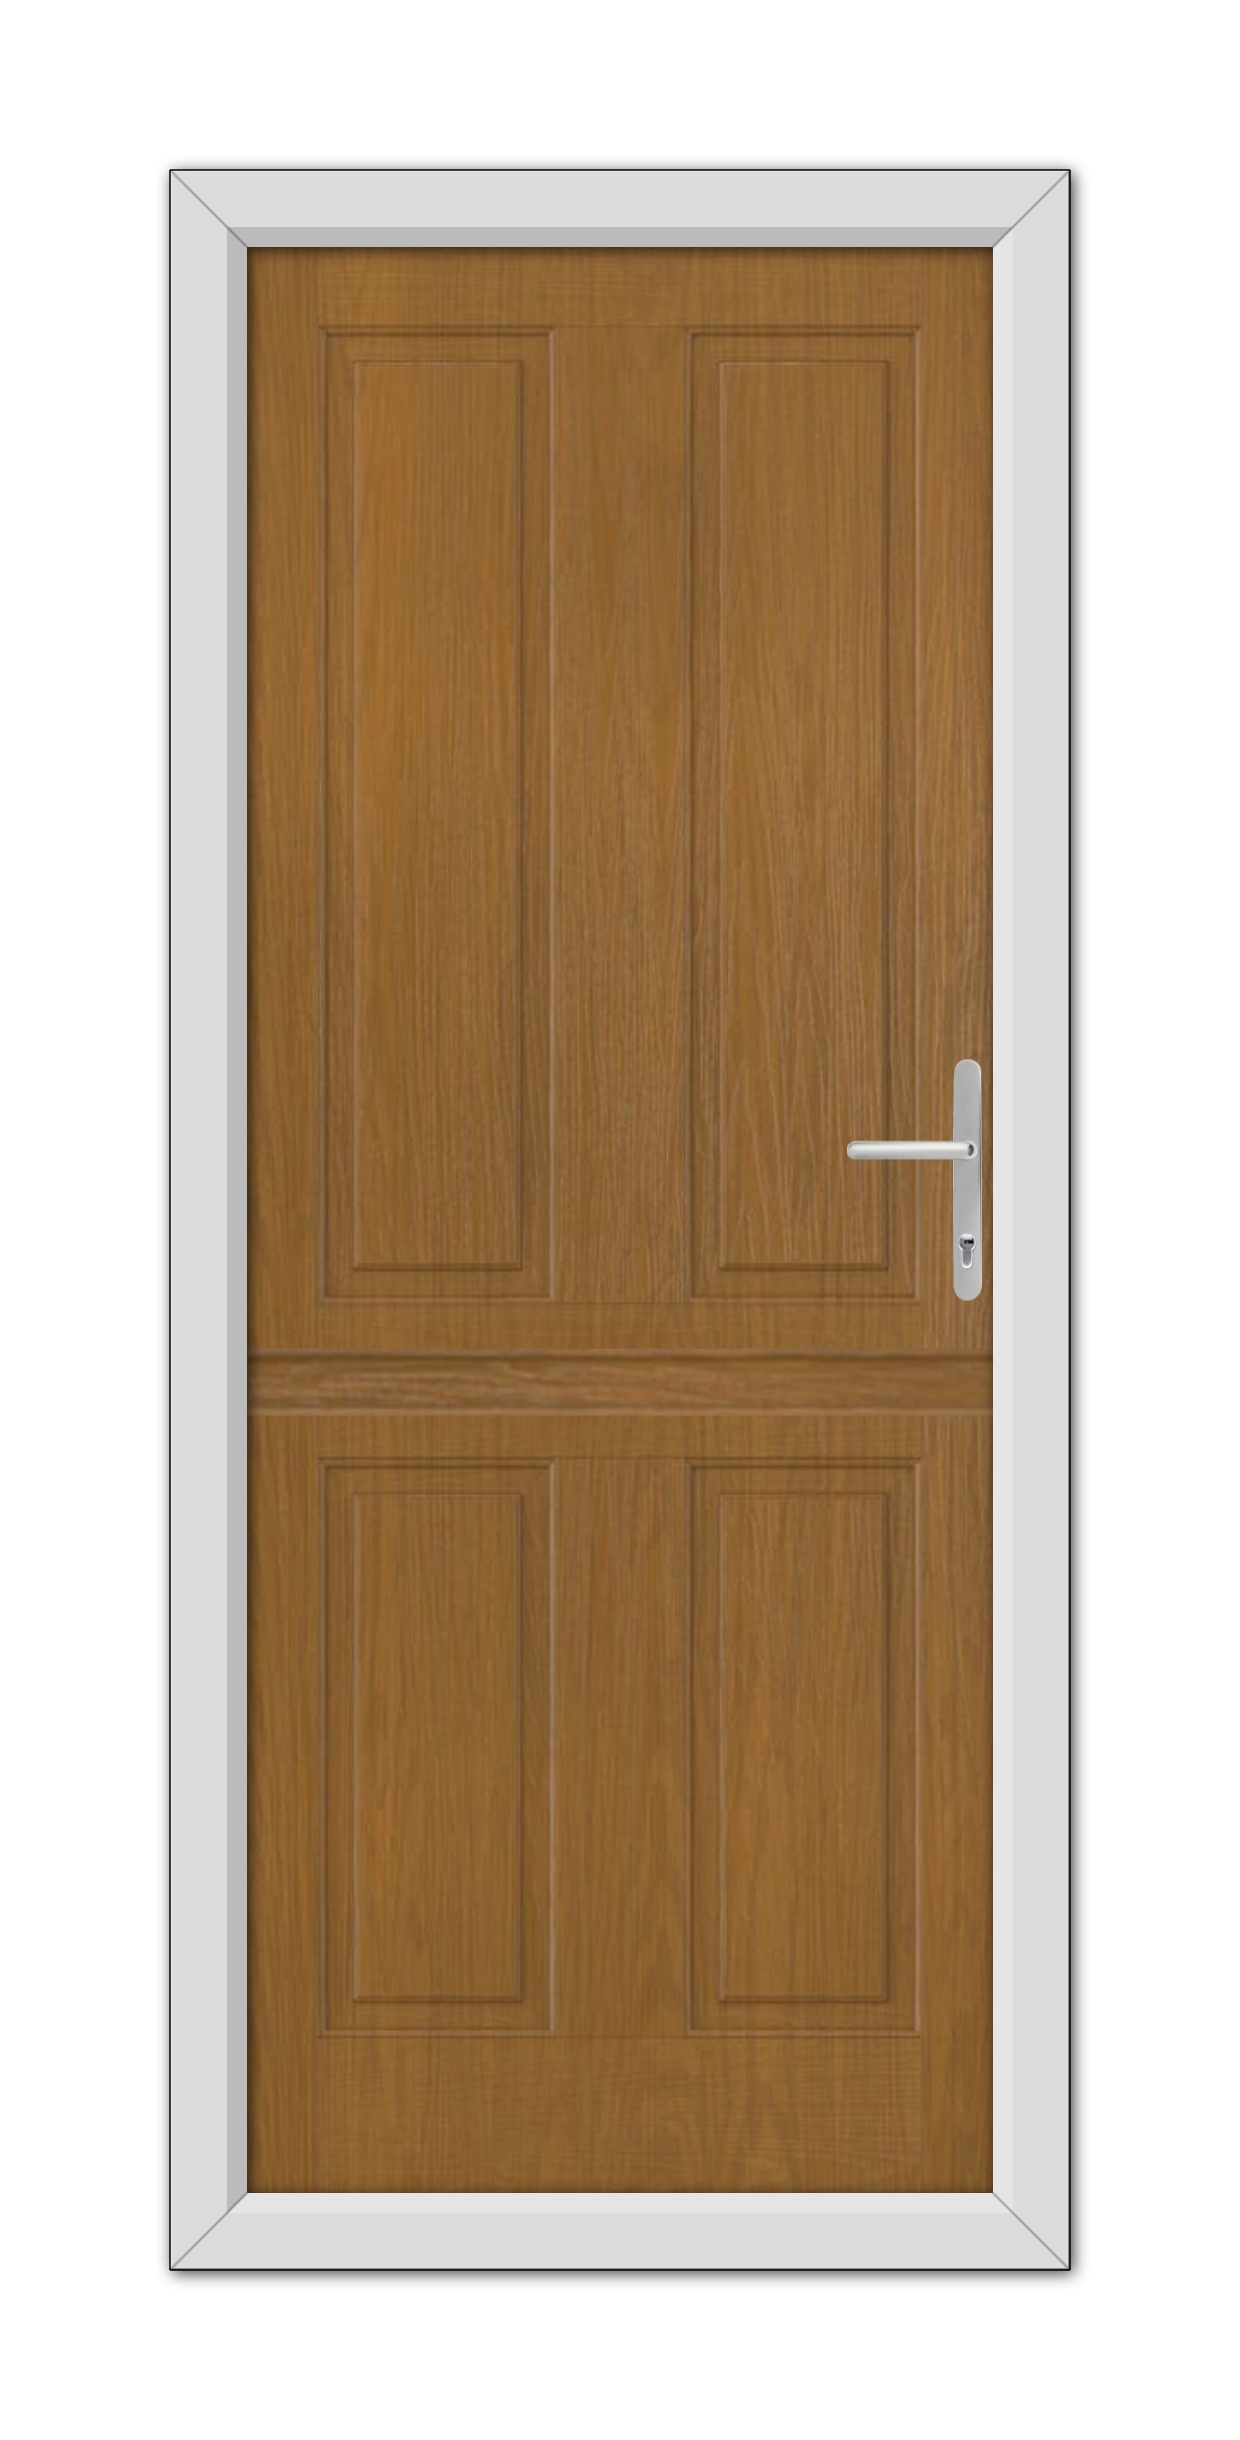 A Oak Whitmore Solid Stable Composite Door 48mm Timber Core with a metal handle, set within a white frame, presented in a frontal view.